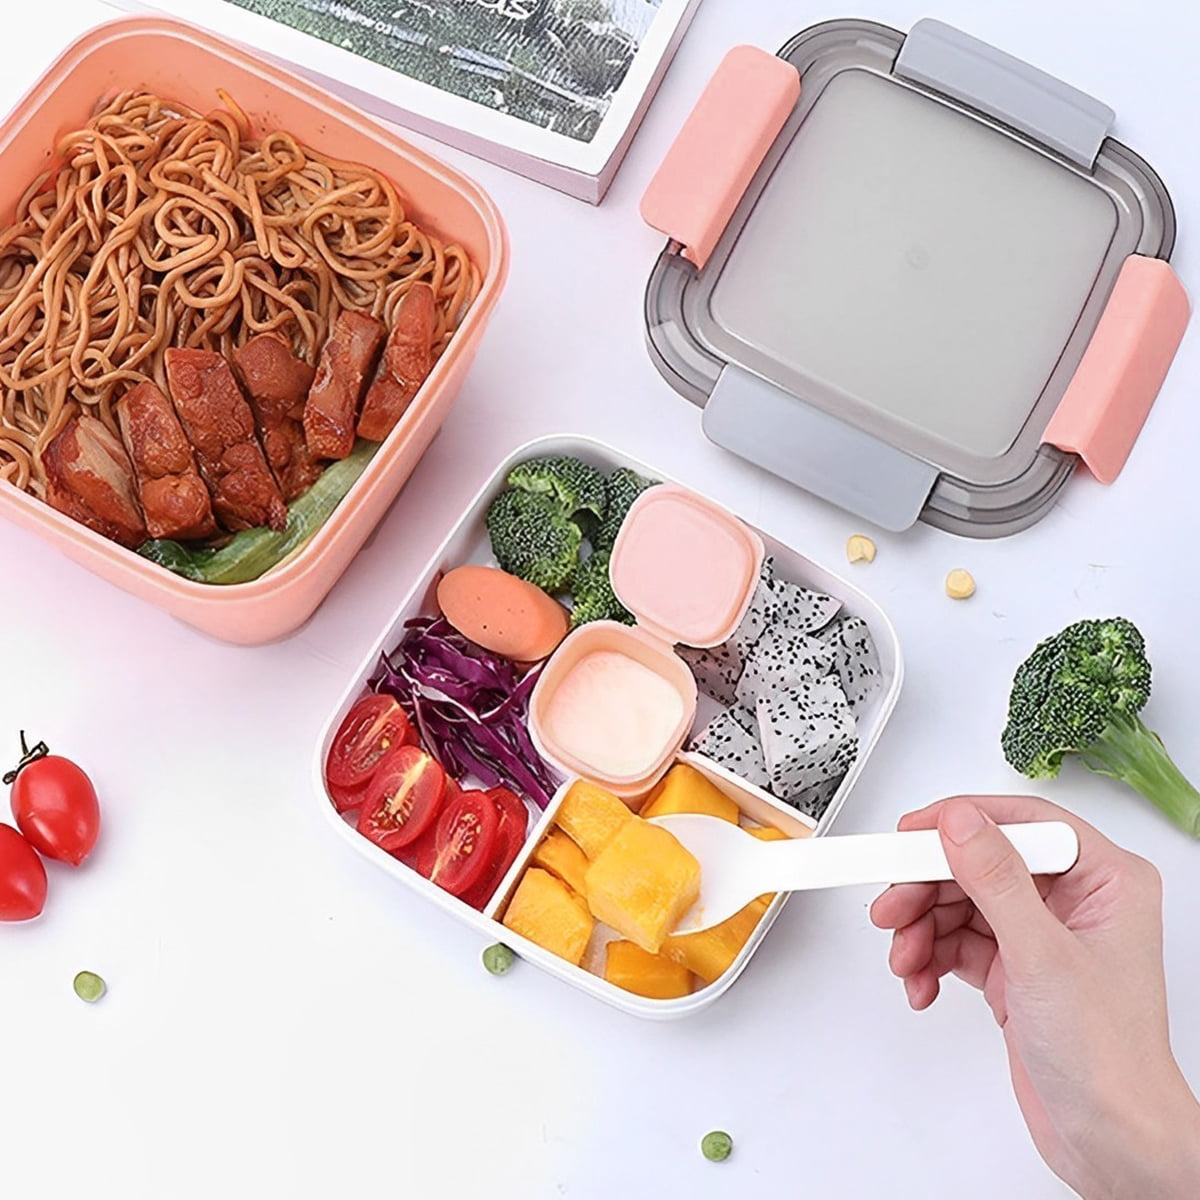 Dww-lunch Box With 3 Compartments, Salad Lunch Box For Adults/kids,  Leakproof Bento Box, Microwavable, Bpa Free Red, 1500ml